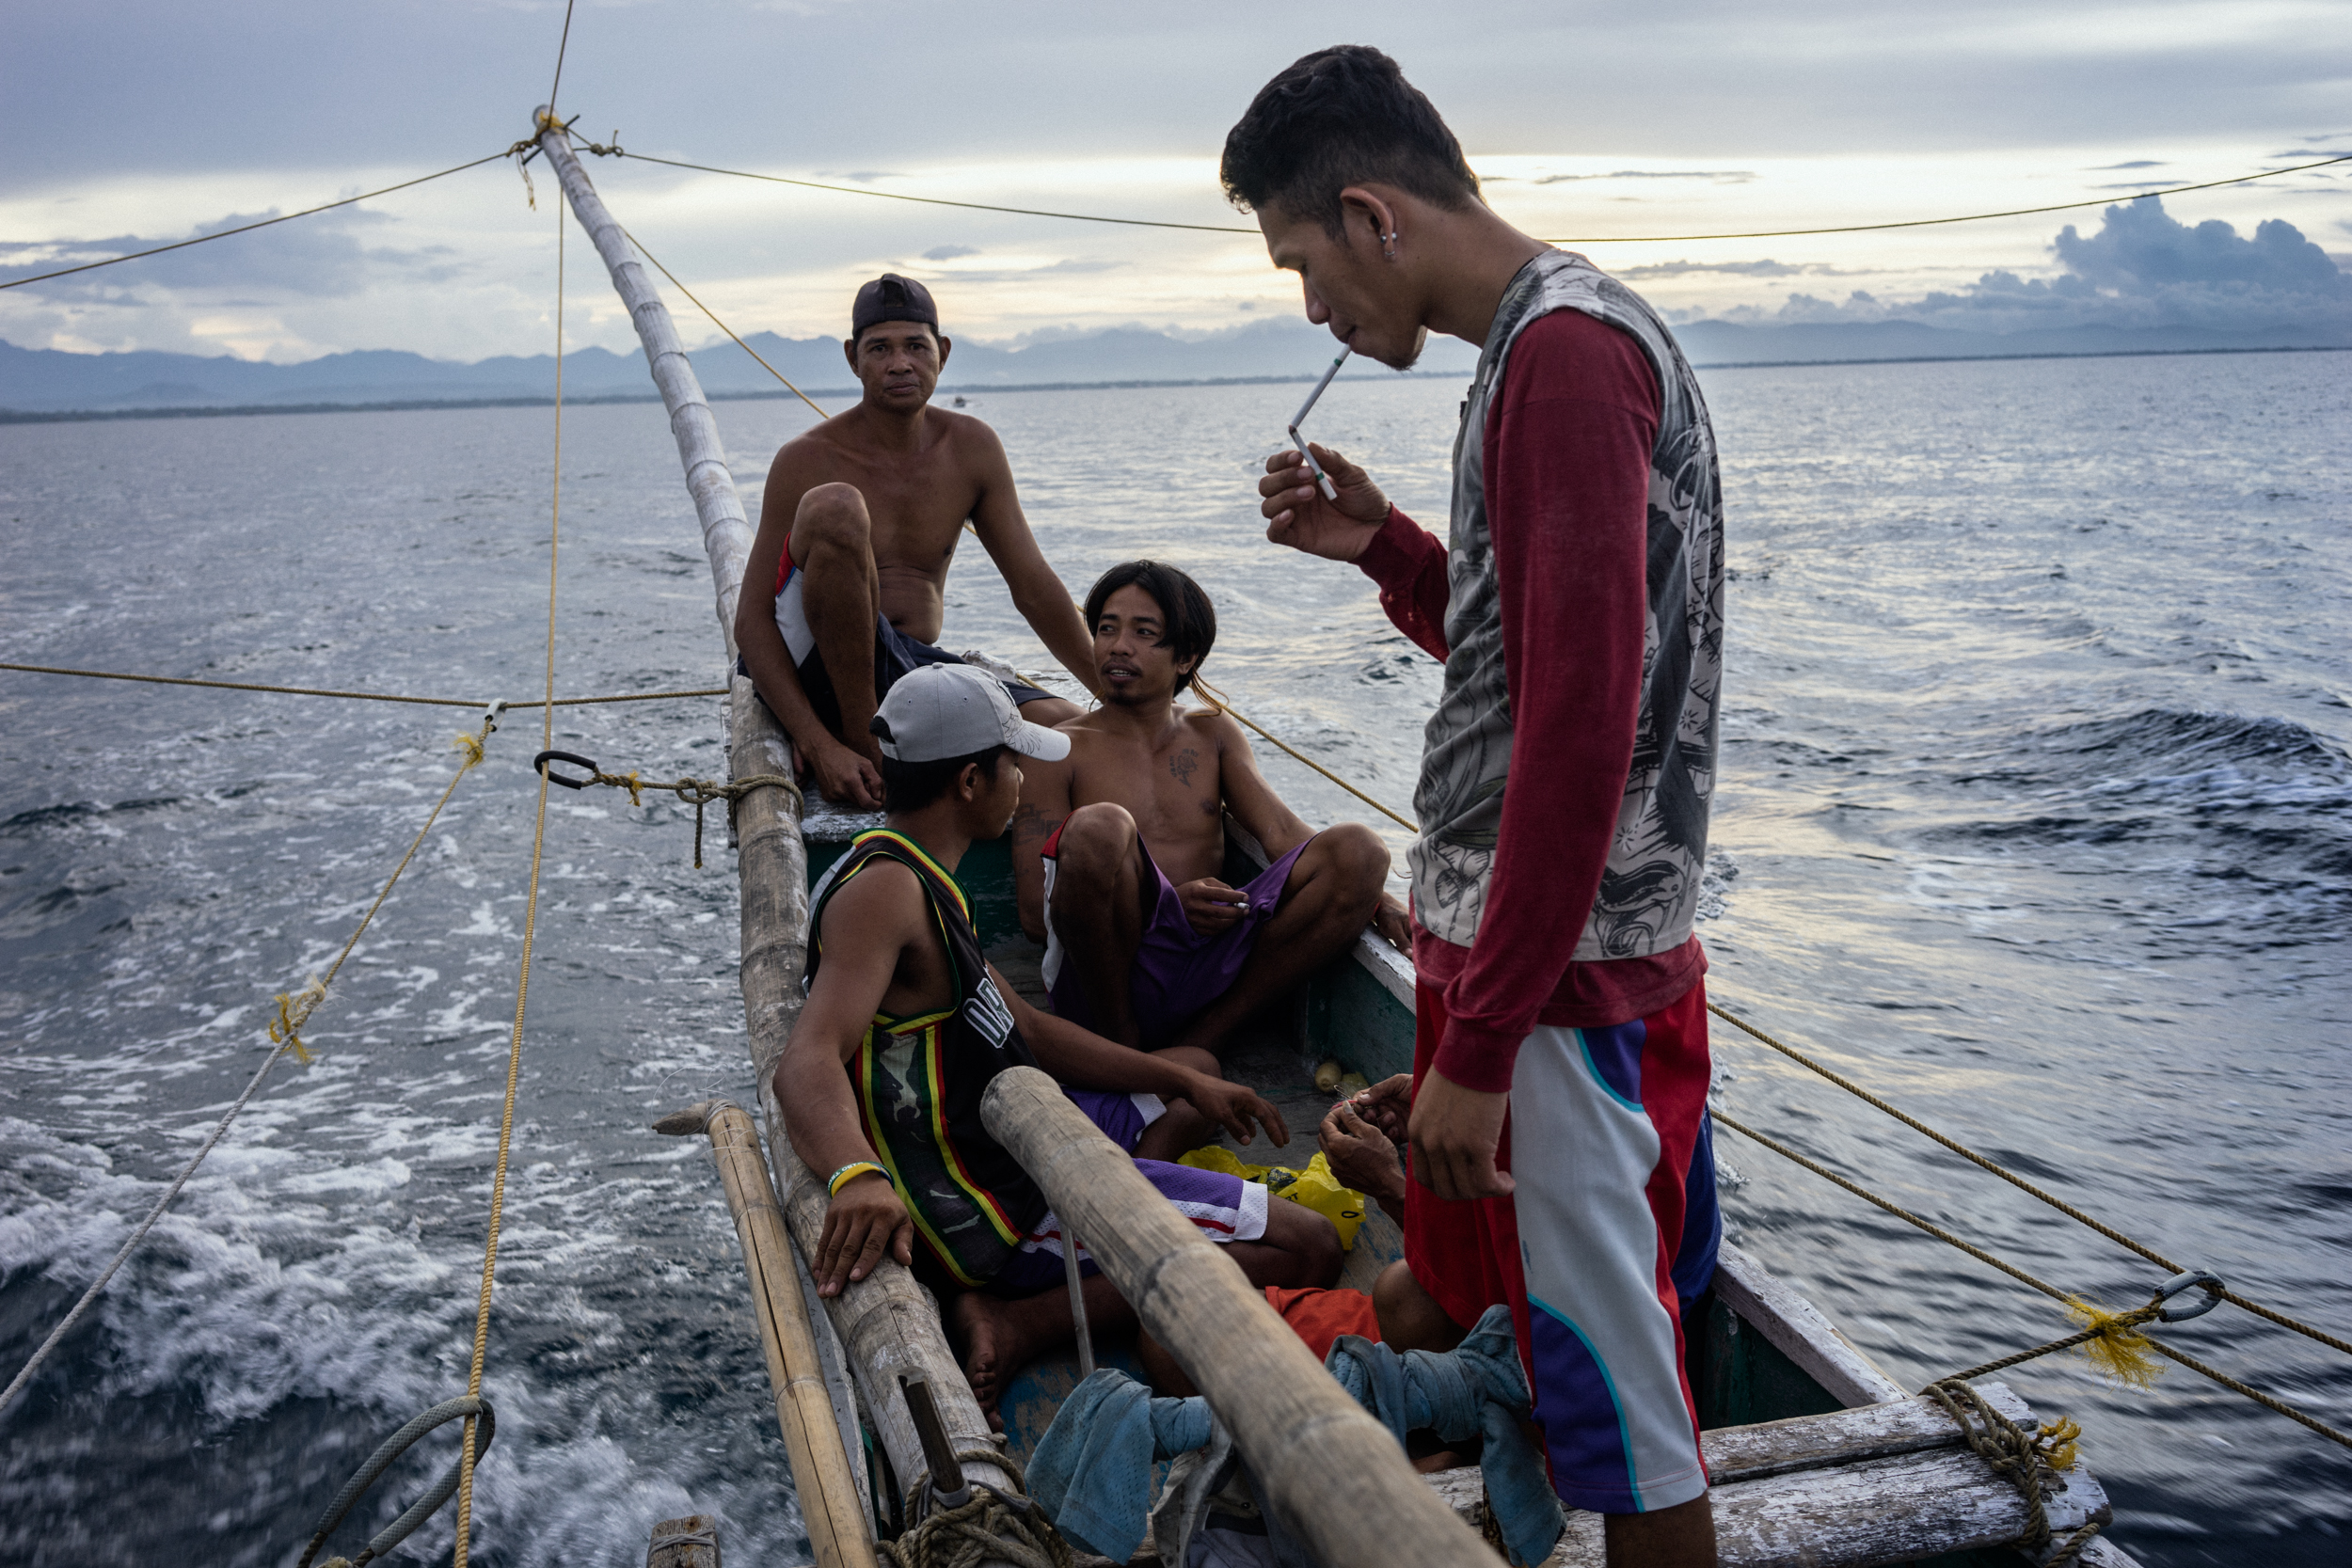  Kalibo, Philippines - September 21, 2015: The crew of a local fishing boat heads out for their night's catch. Members of the crew, who make approximately 35 USD per month, have expressed their desire to work on a larger fishing vessel for the promis